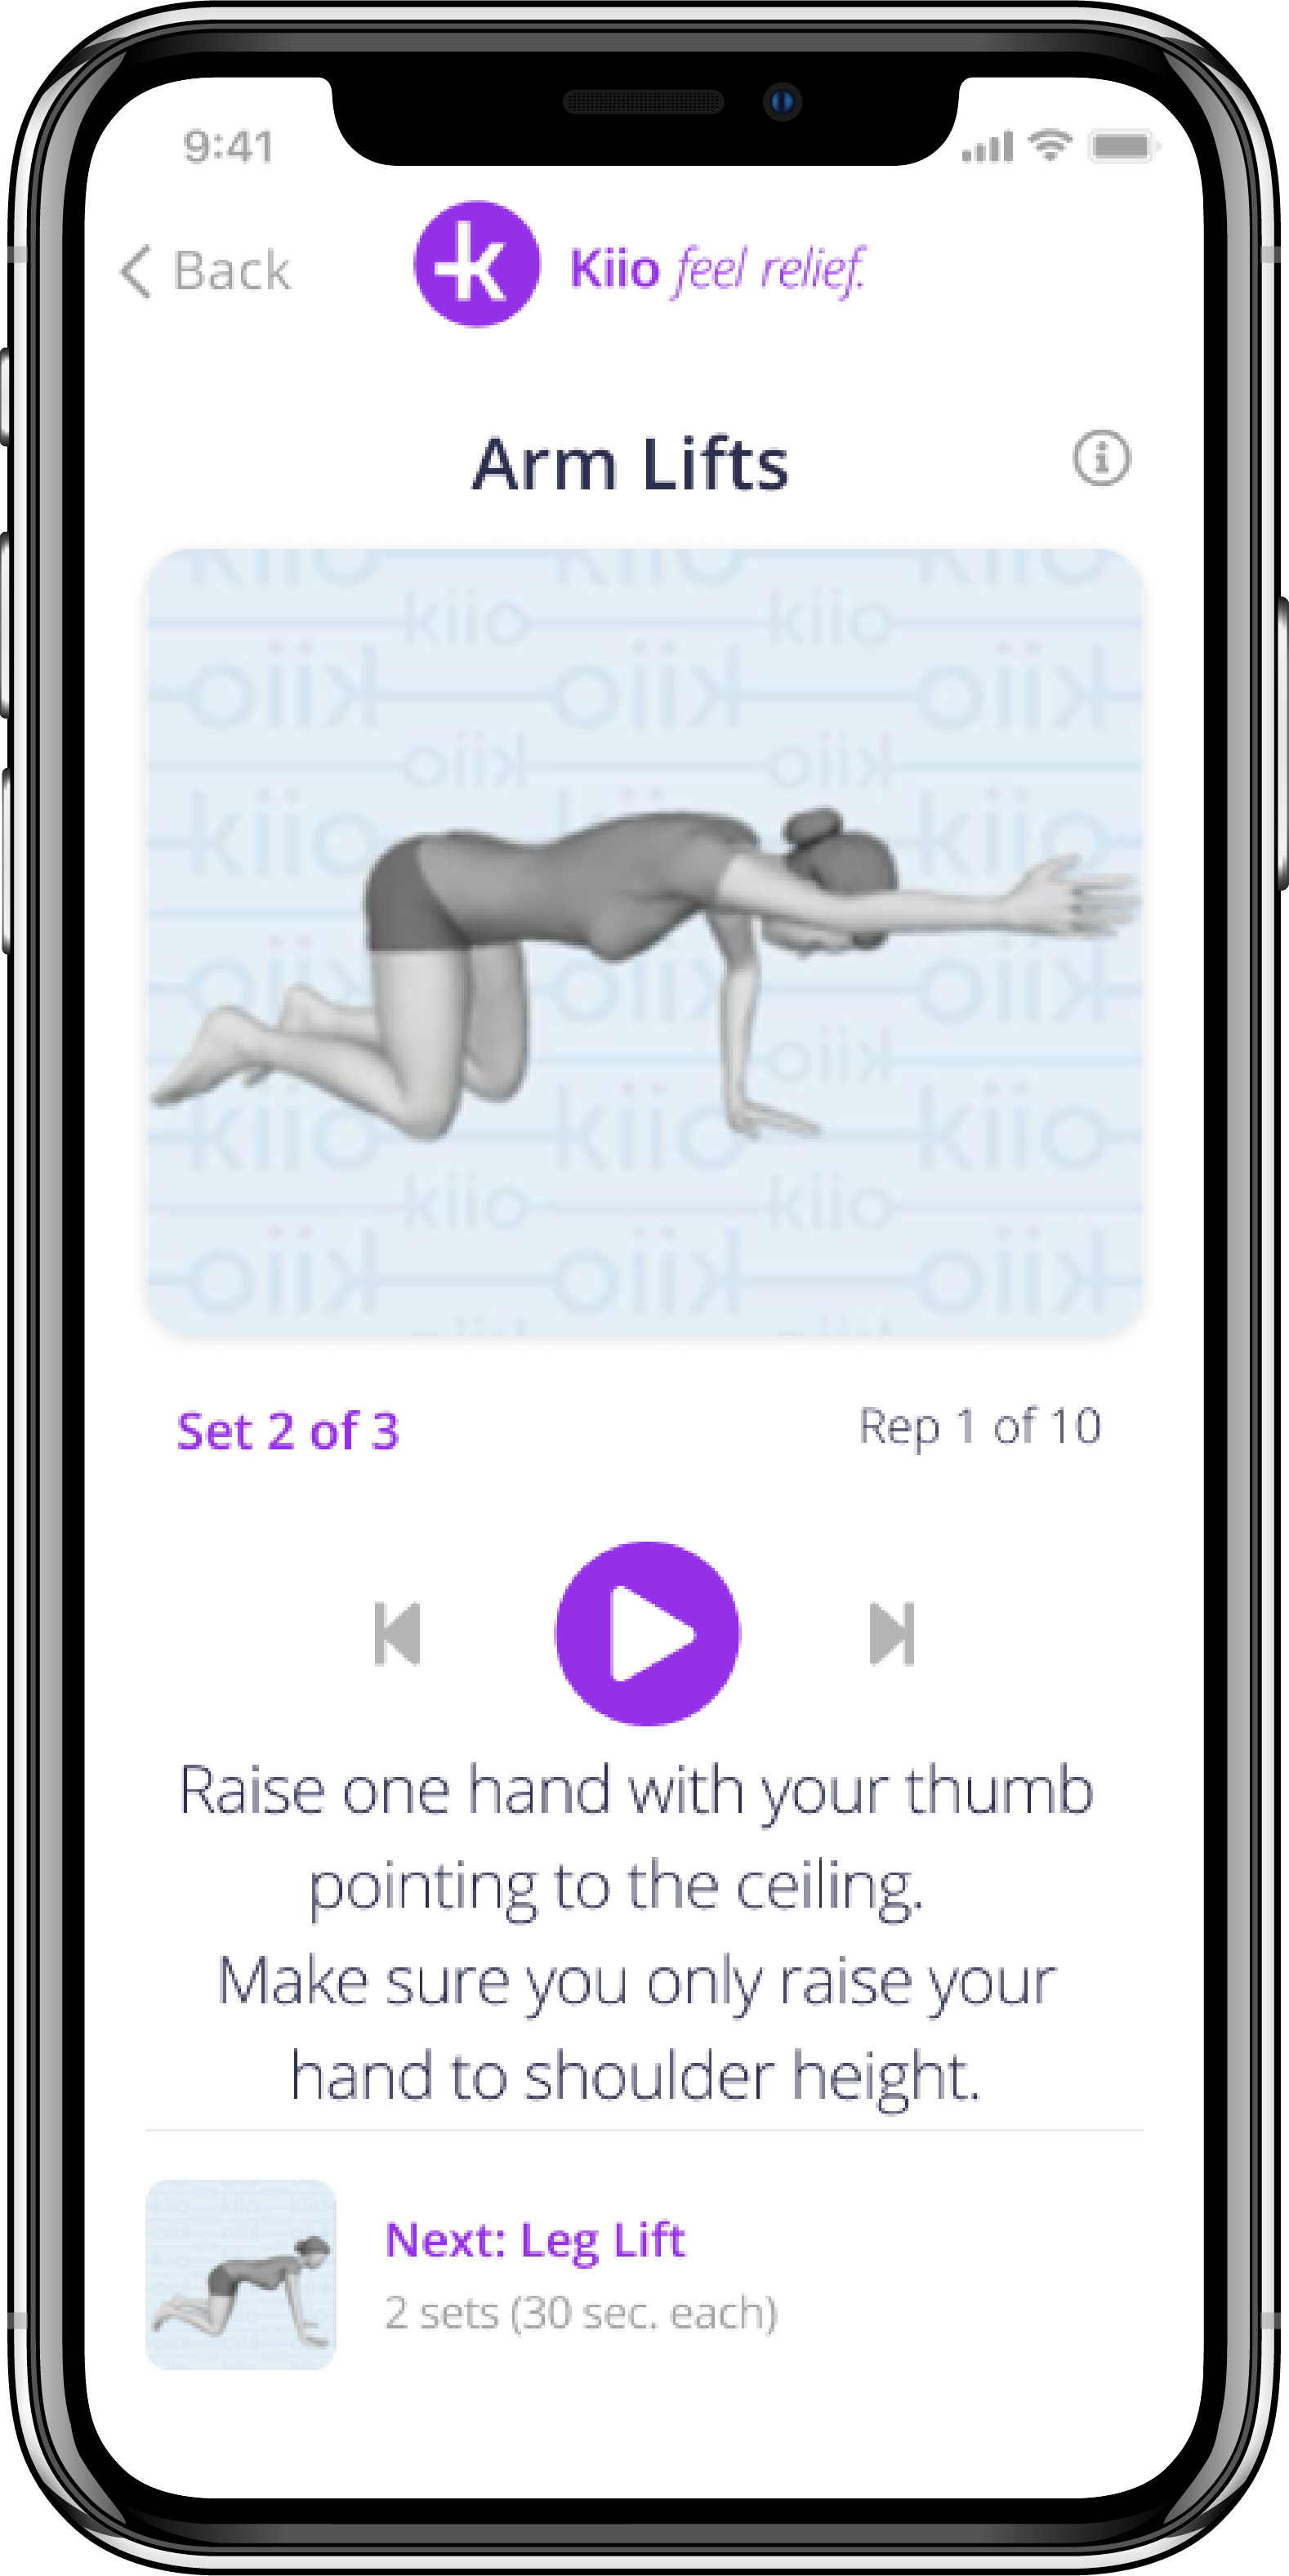 Kiio integrates AI and evidence-based clinical practice guidelines to deliver a personalized exercise therapy and interactive coaching, which includes setting goals, tracking progress, adapting to each participant’s pace, and advancing them as they build strength and feel better. Kiio enables people to decide when, where, and how Kiio works best for them, including choosing unlimited 1:1 human coaching if they want it.  